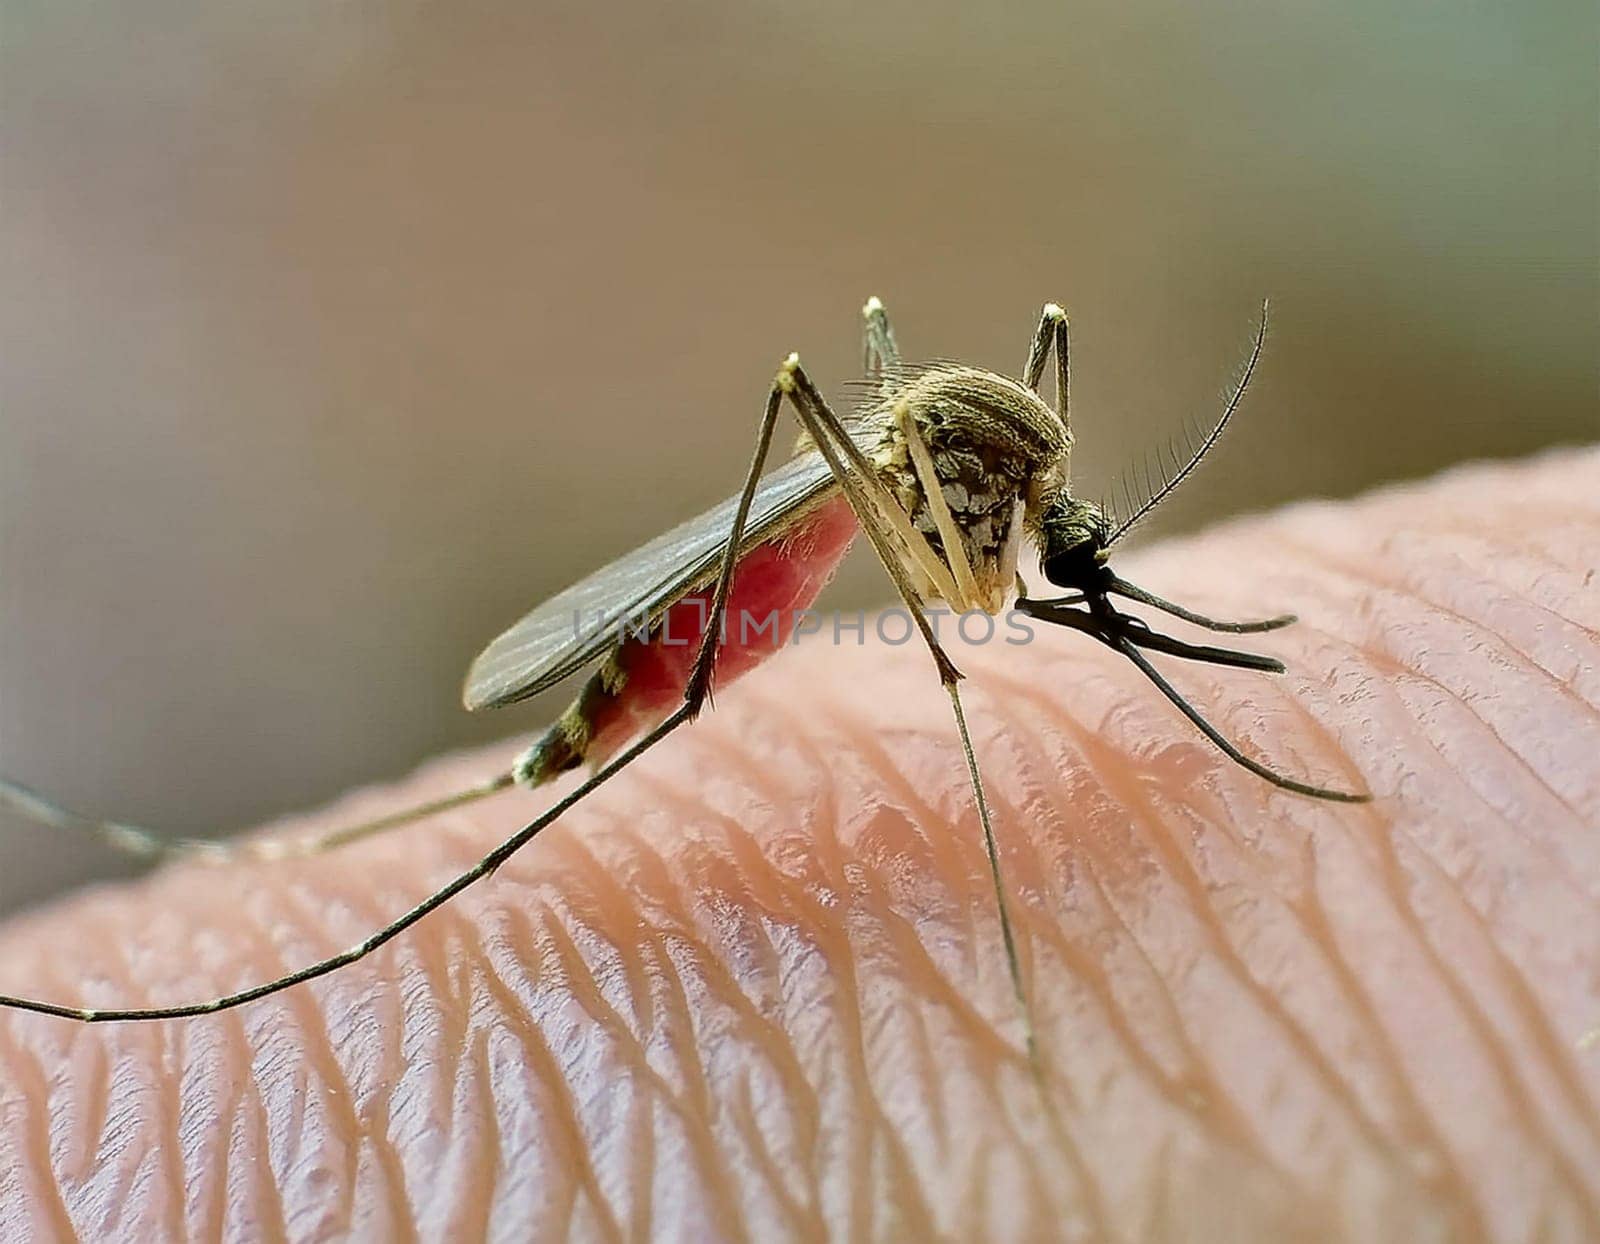 Aedes aegypti mosquito. Close-up of a mosquito sucking human blood, by JFsPic